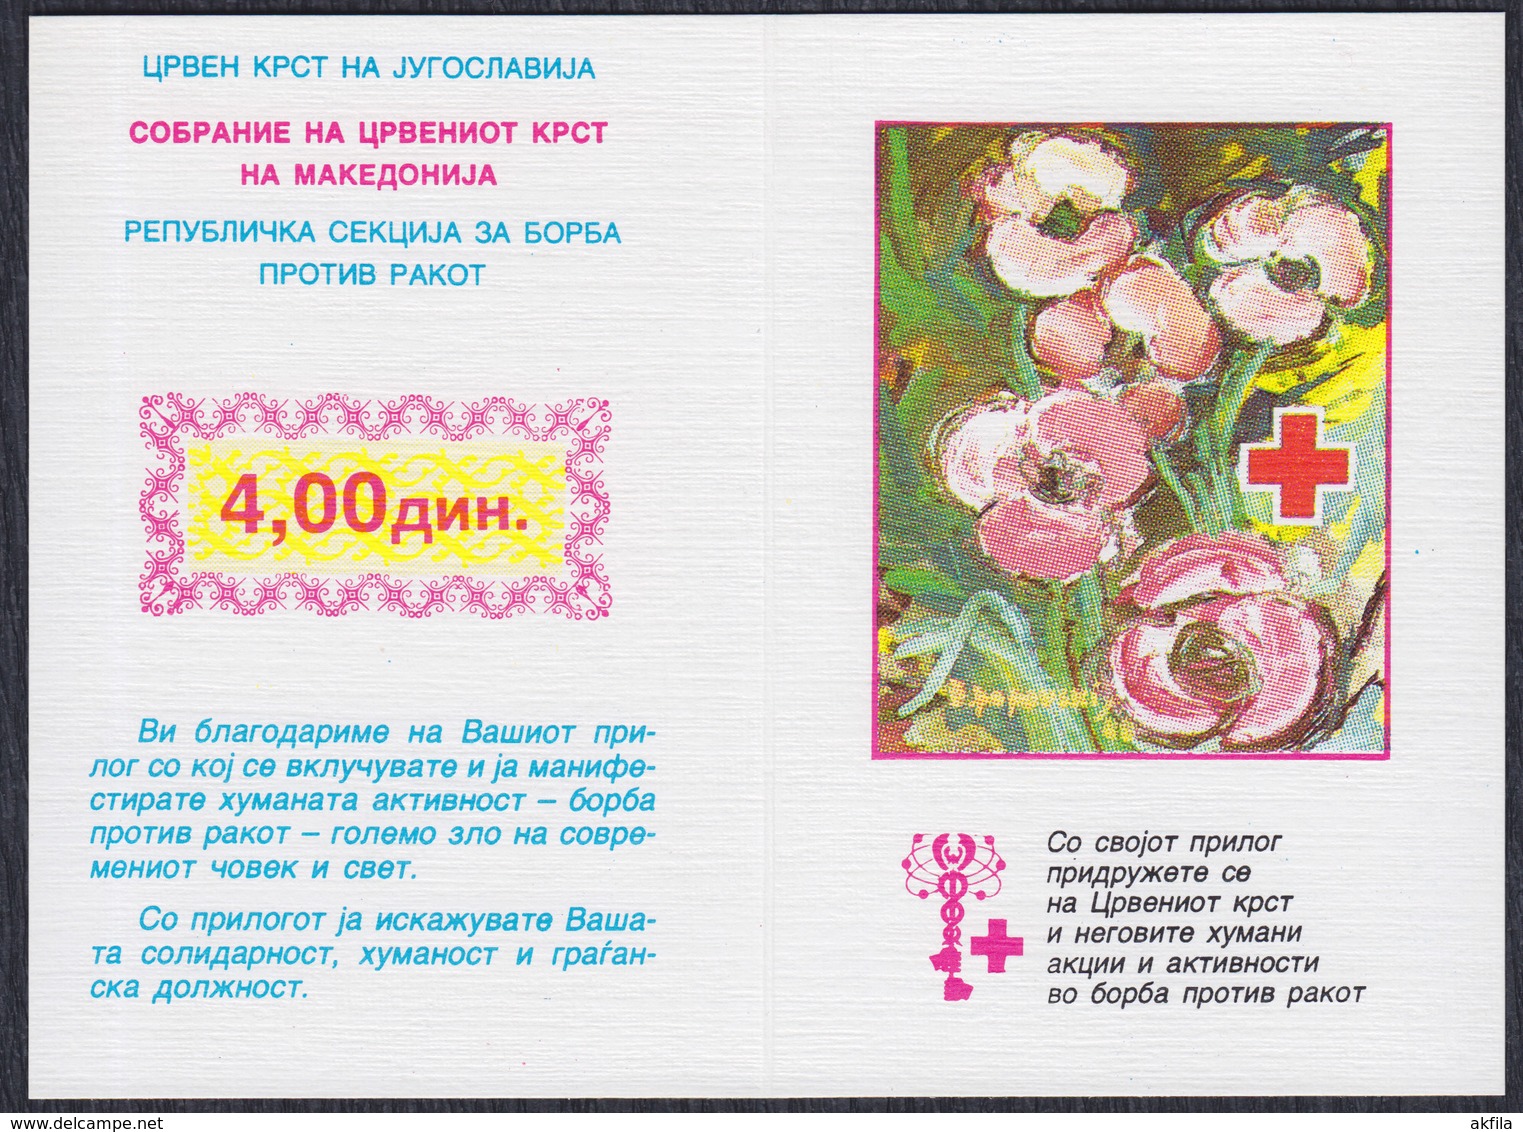 Yugoslavia 1990 Fight Against Cancer, Surcharge, Booklet Perforated And Imperforated - Markenheftchen